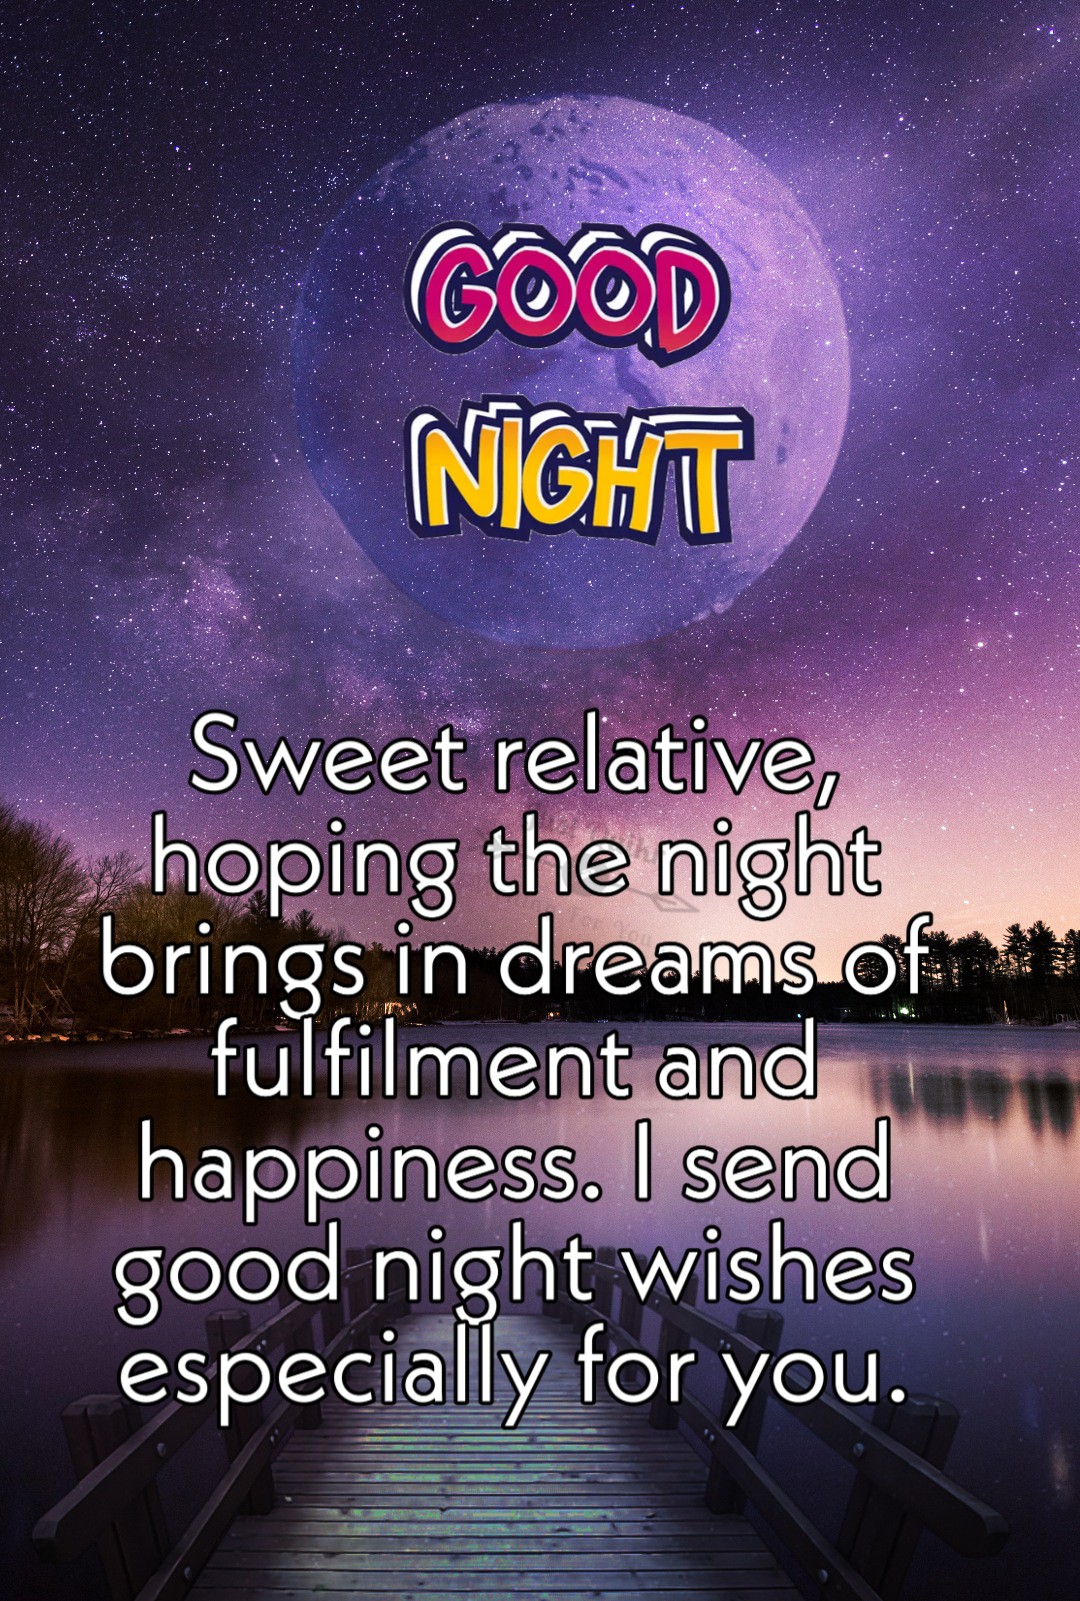 Good Night HD Pics Images For Relatives